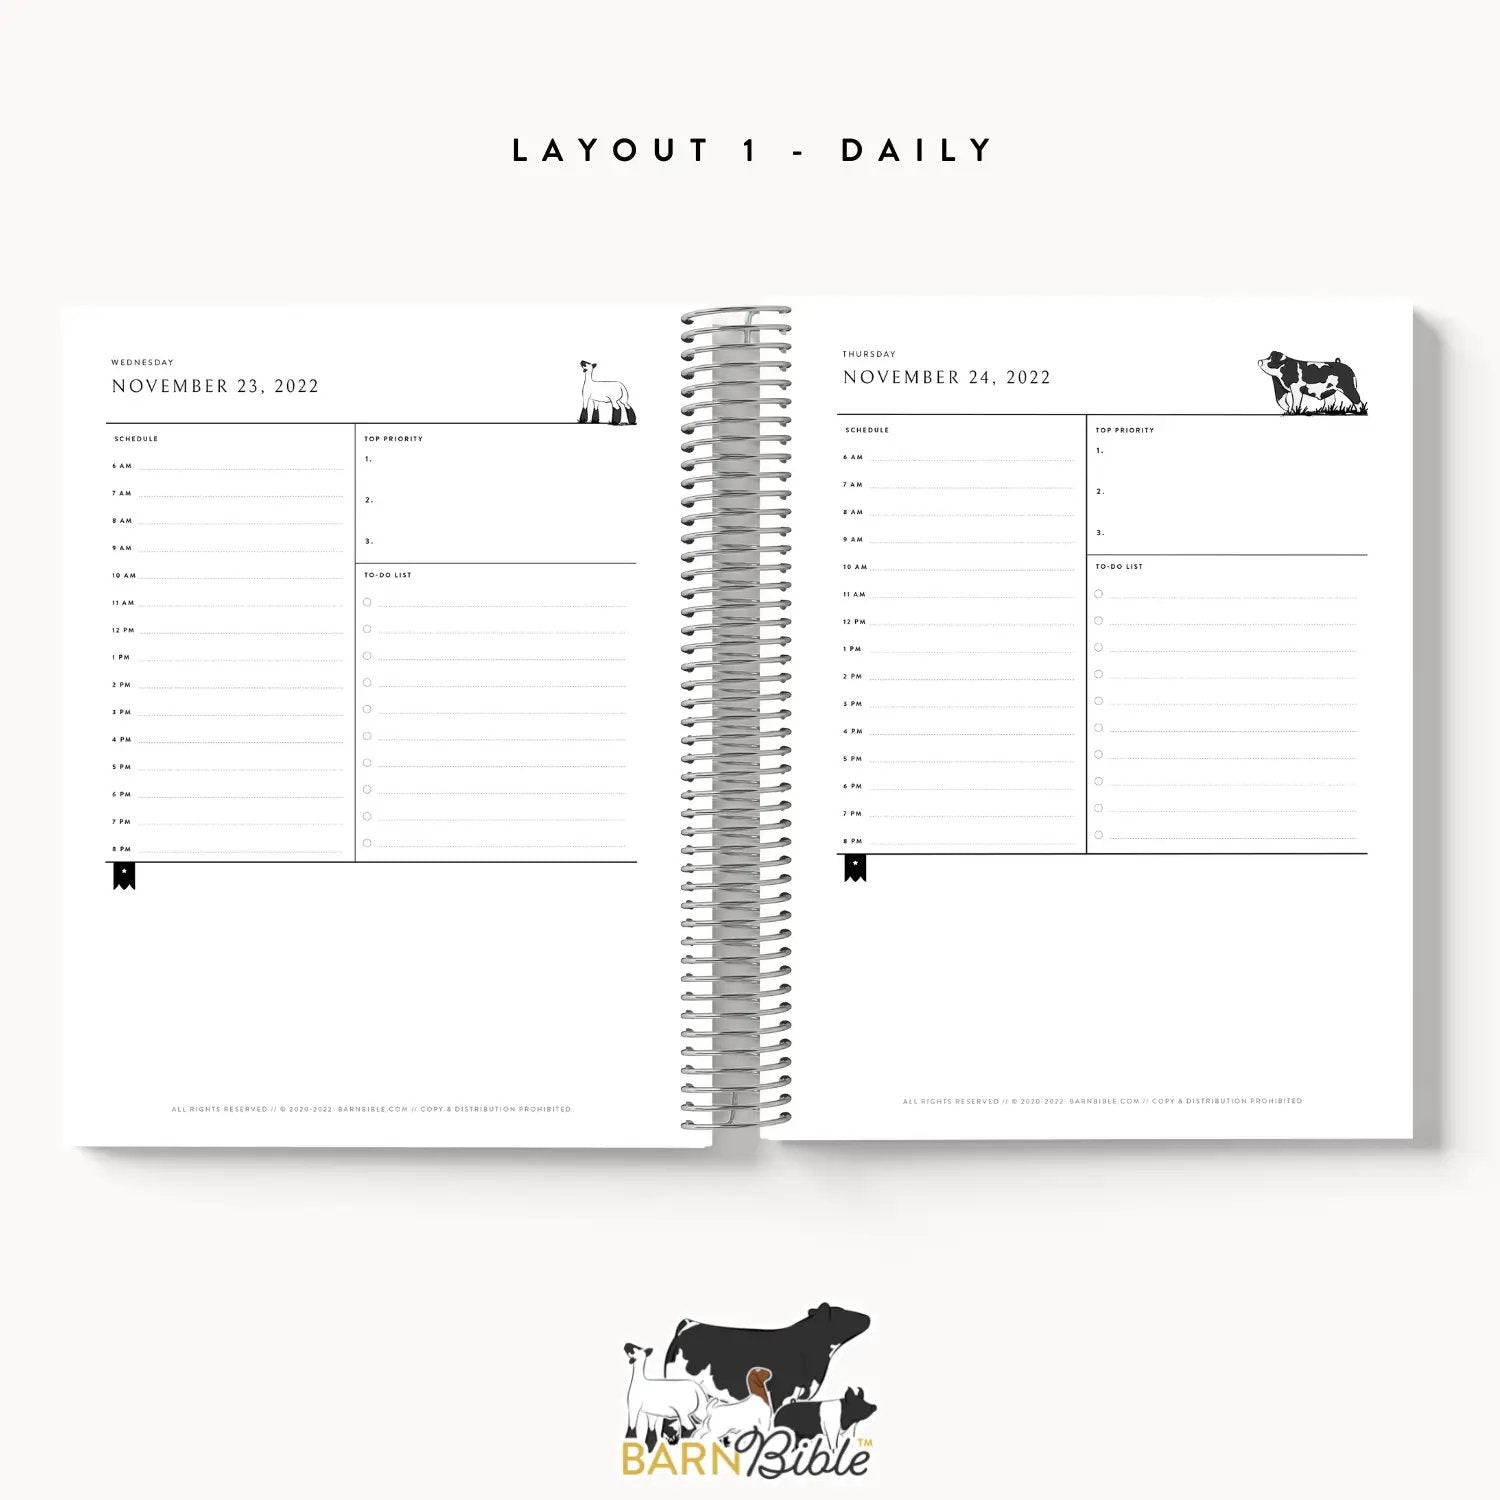 Personalized-Livestock-Daily Planner - Gingham Cover